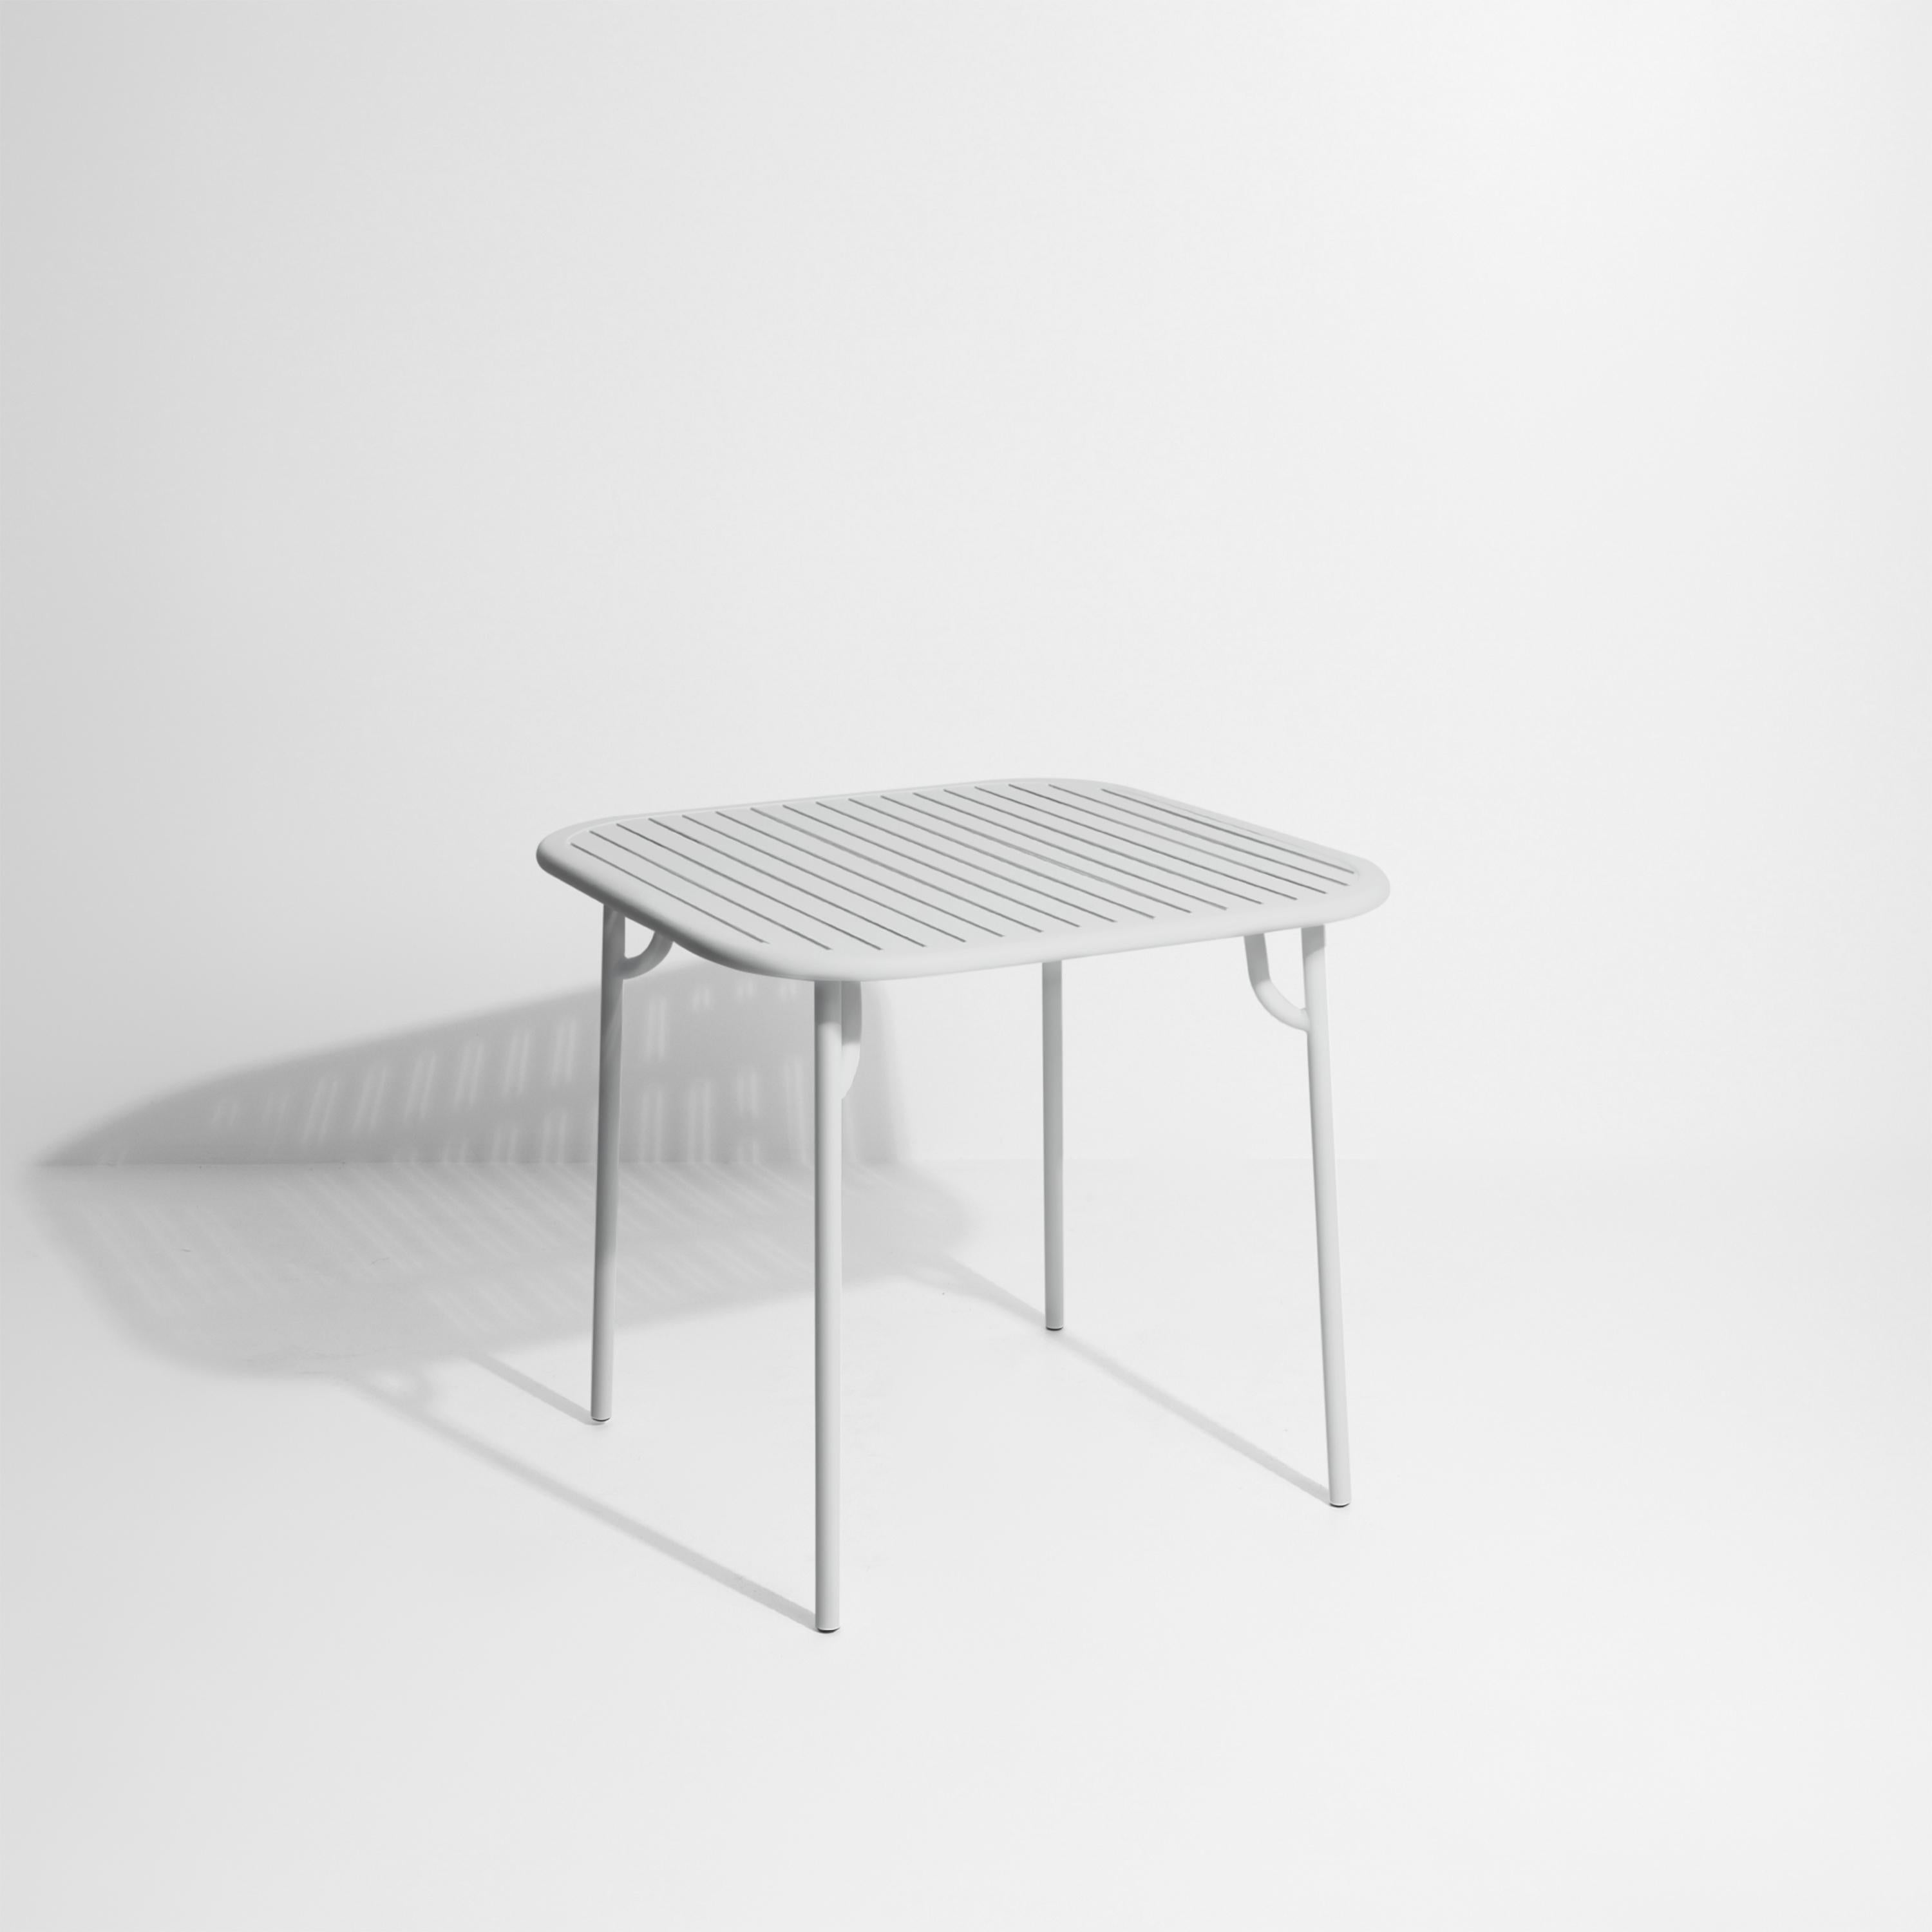 Petite Friture Week-End Square Dining Table in Pearl Grey Aluminium with Slats by Studio BrichetZiegler, 2017

The week-end collection is a full range of outdoor furniture, in aluminium grained epoxy paint, matt finish, that includes 18 functions